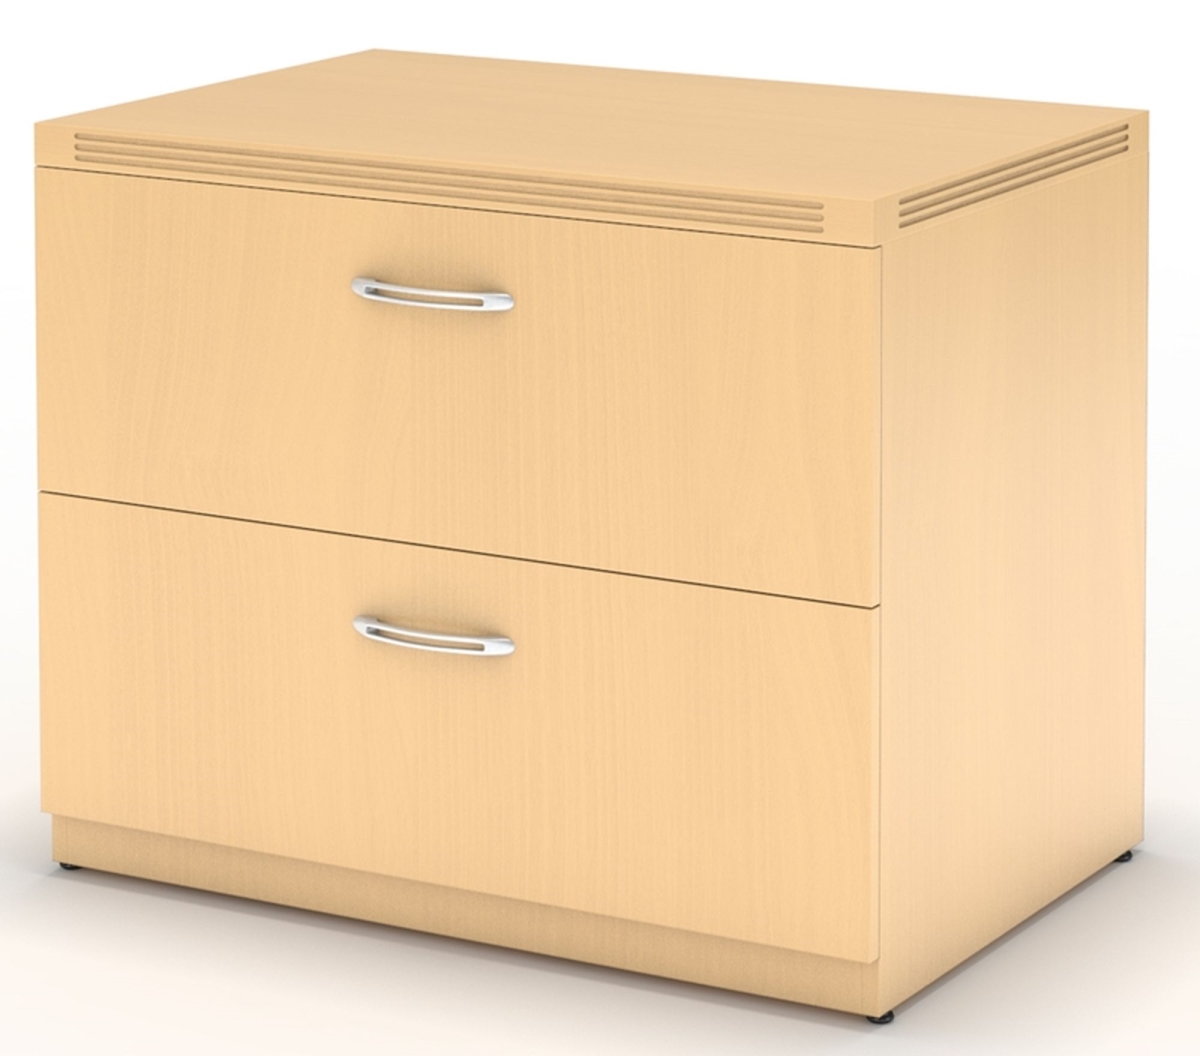 Aflf36lma 36 In. Aberdeen Series Freestanding Lateral File - Maple - 29.5 X 36 X 24 In.